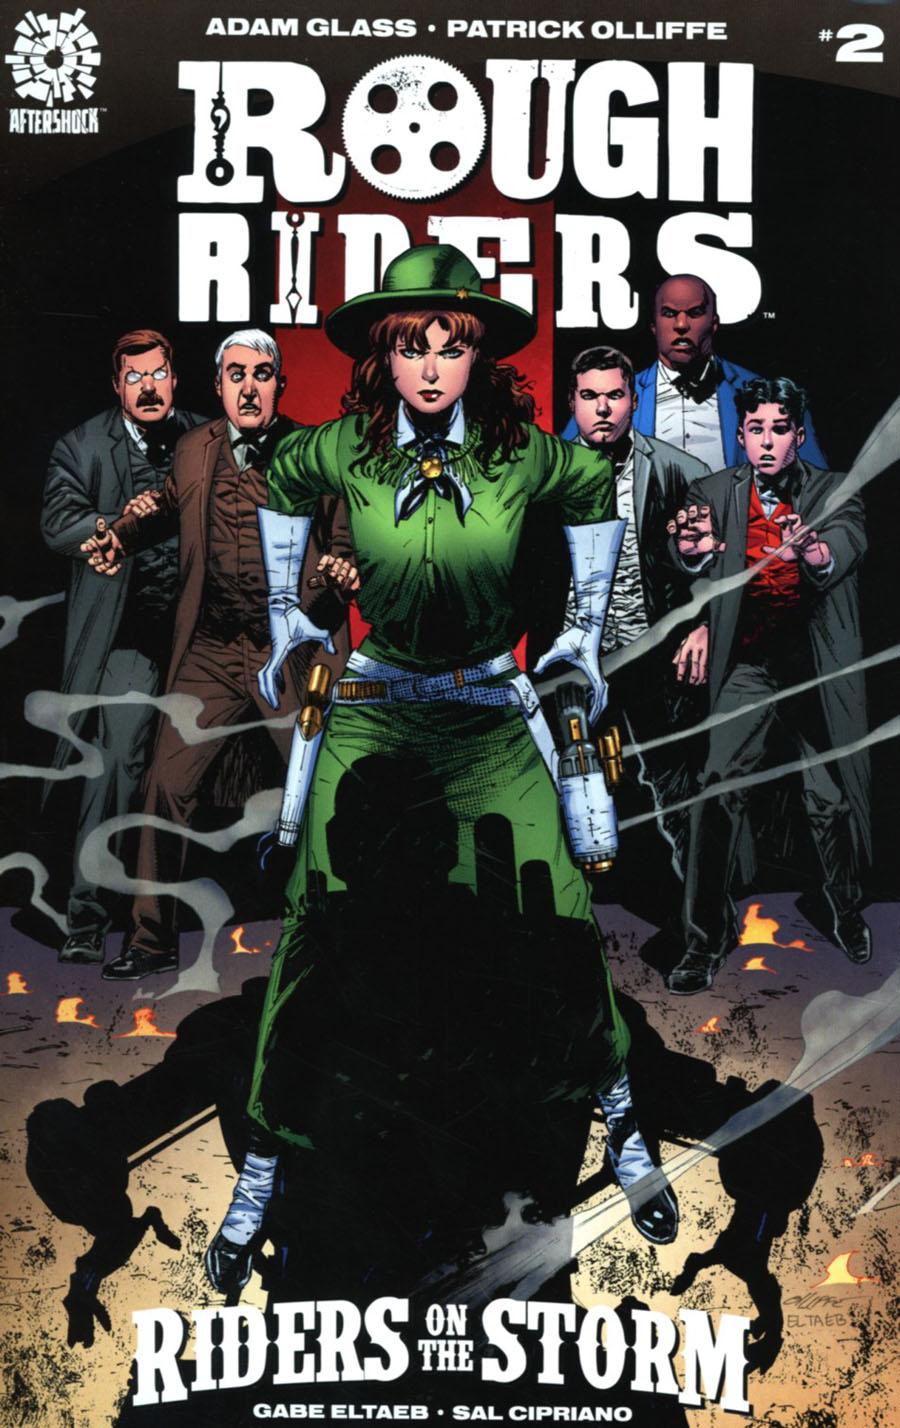 Rough Riders Riders On The Storm Vol. 1 #2